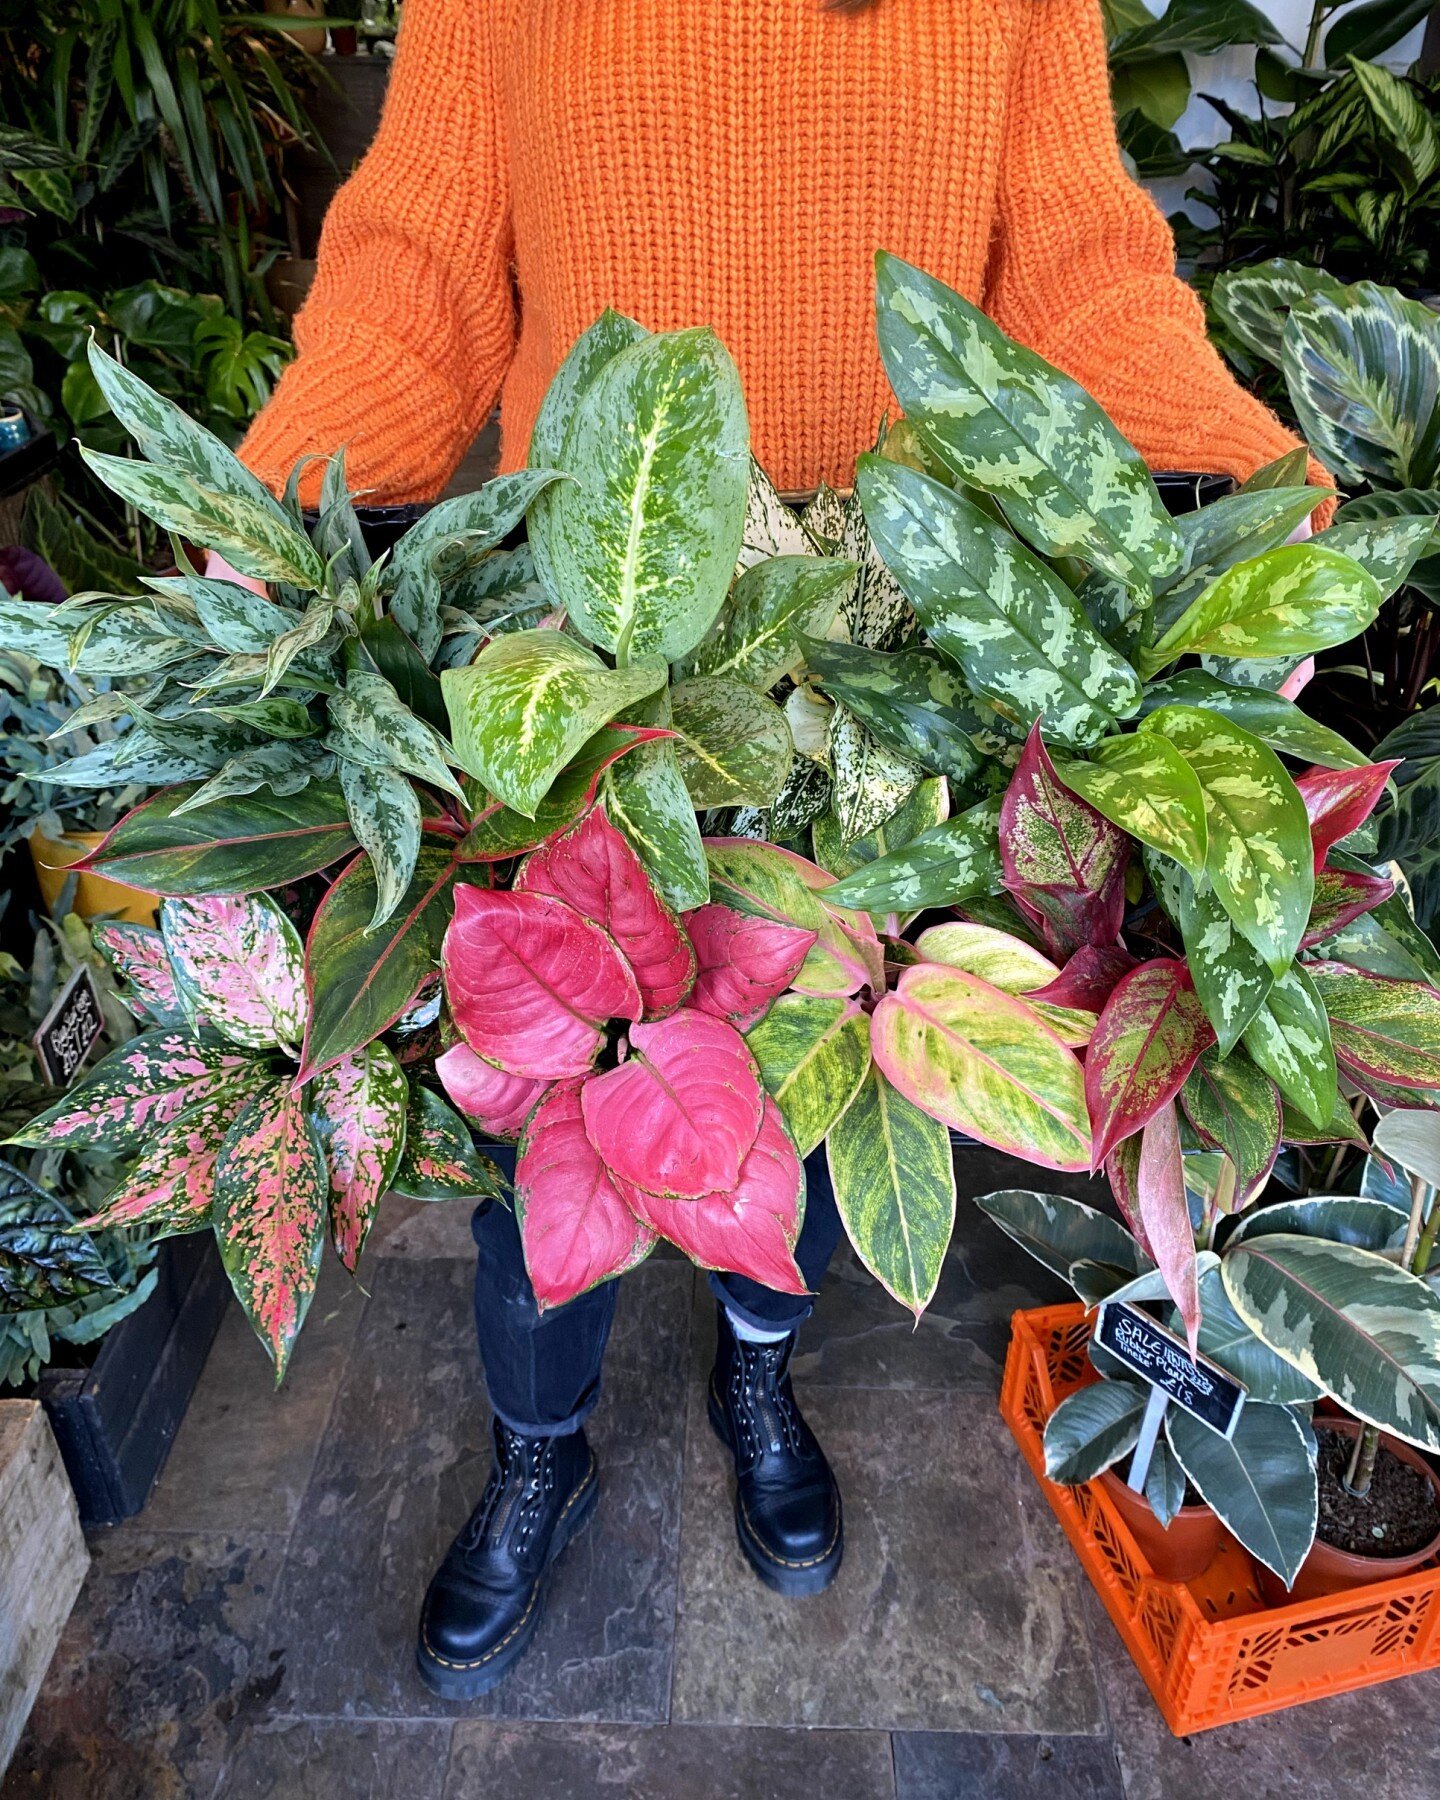 Anyone else on a mission to collect every Aglaonema possible?! 😅  We're hooked.

Just landed in store - Drop by this weekend and grab 1 [or 9]
Low maintenance + great air purifiers 👌

#plants #nature #plantsofinstagram #plantsmakepeoplehappy #house